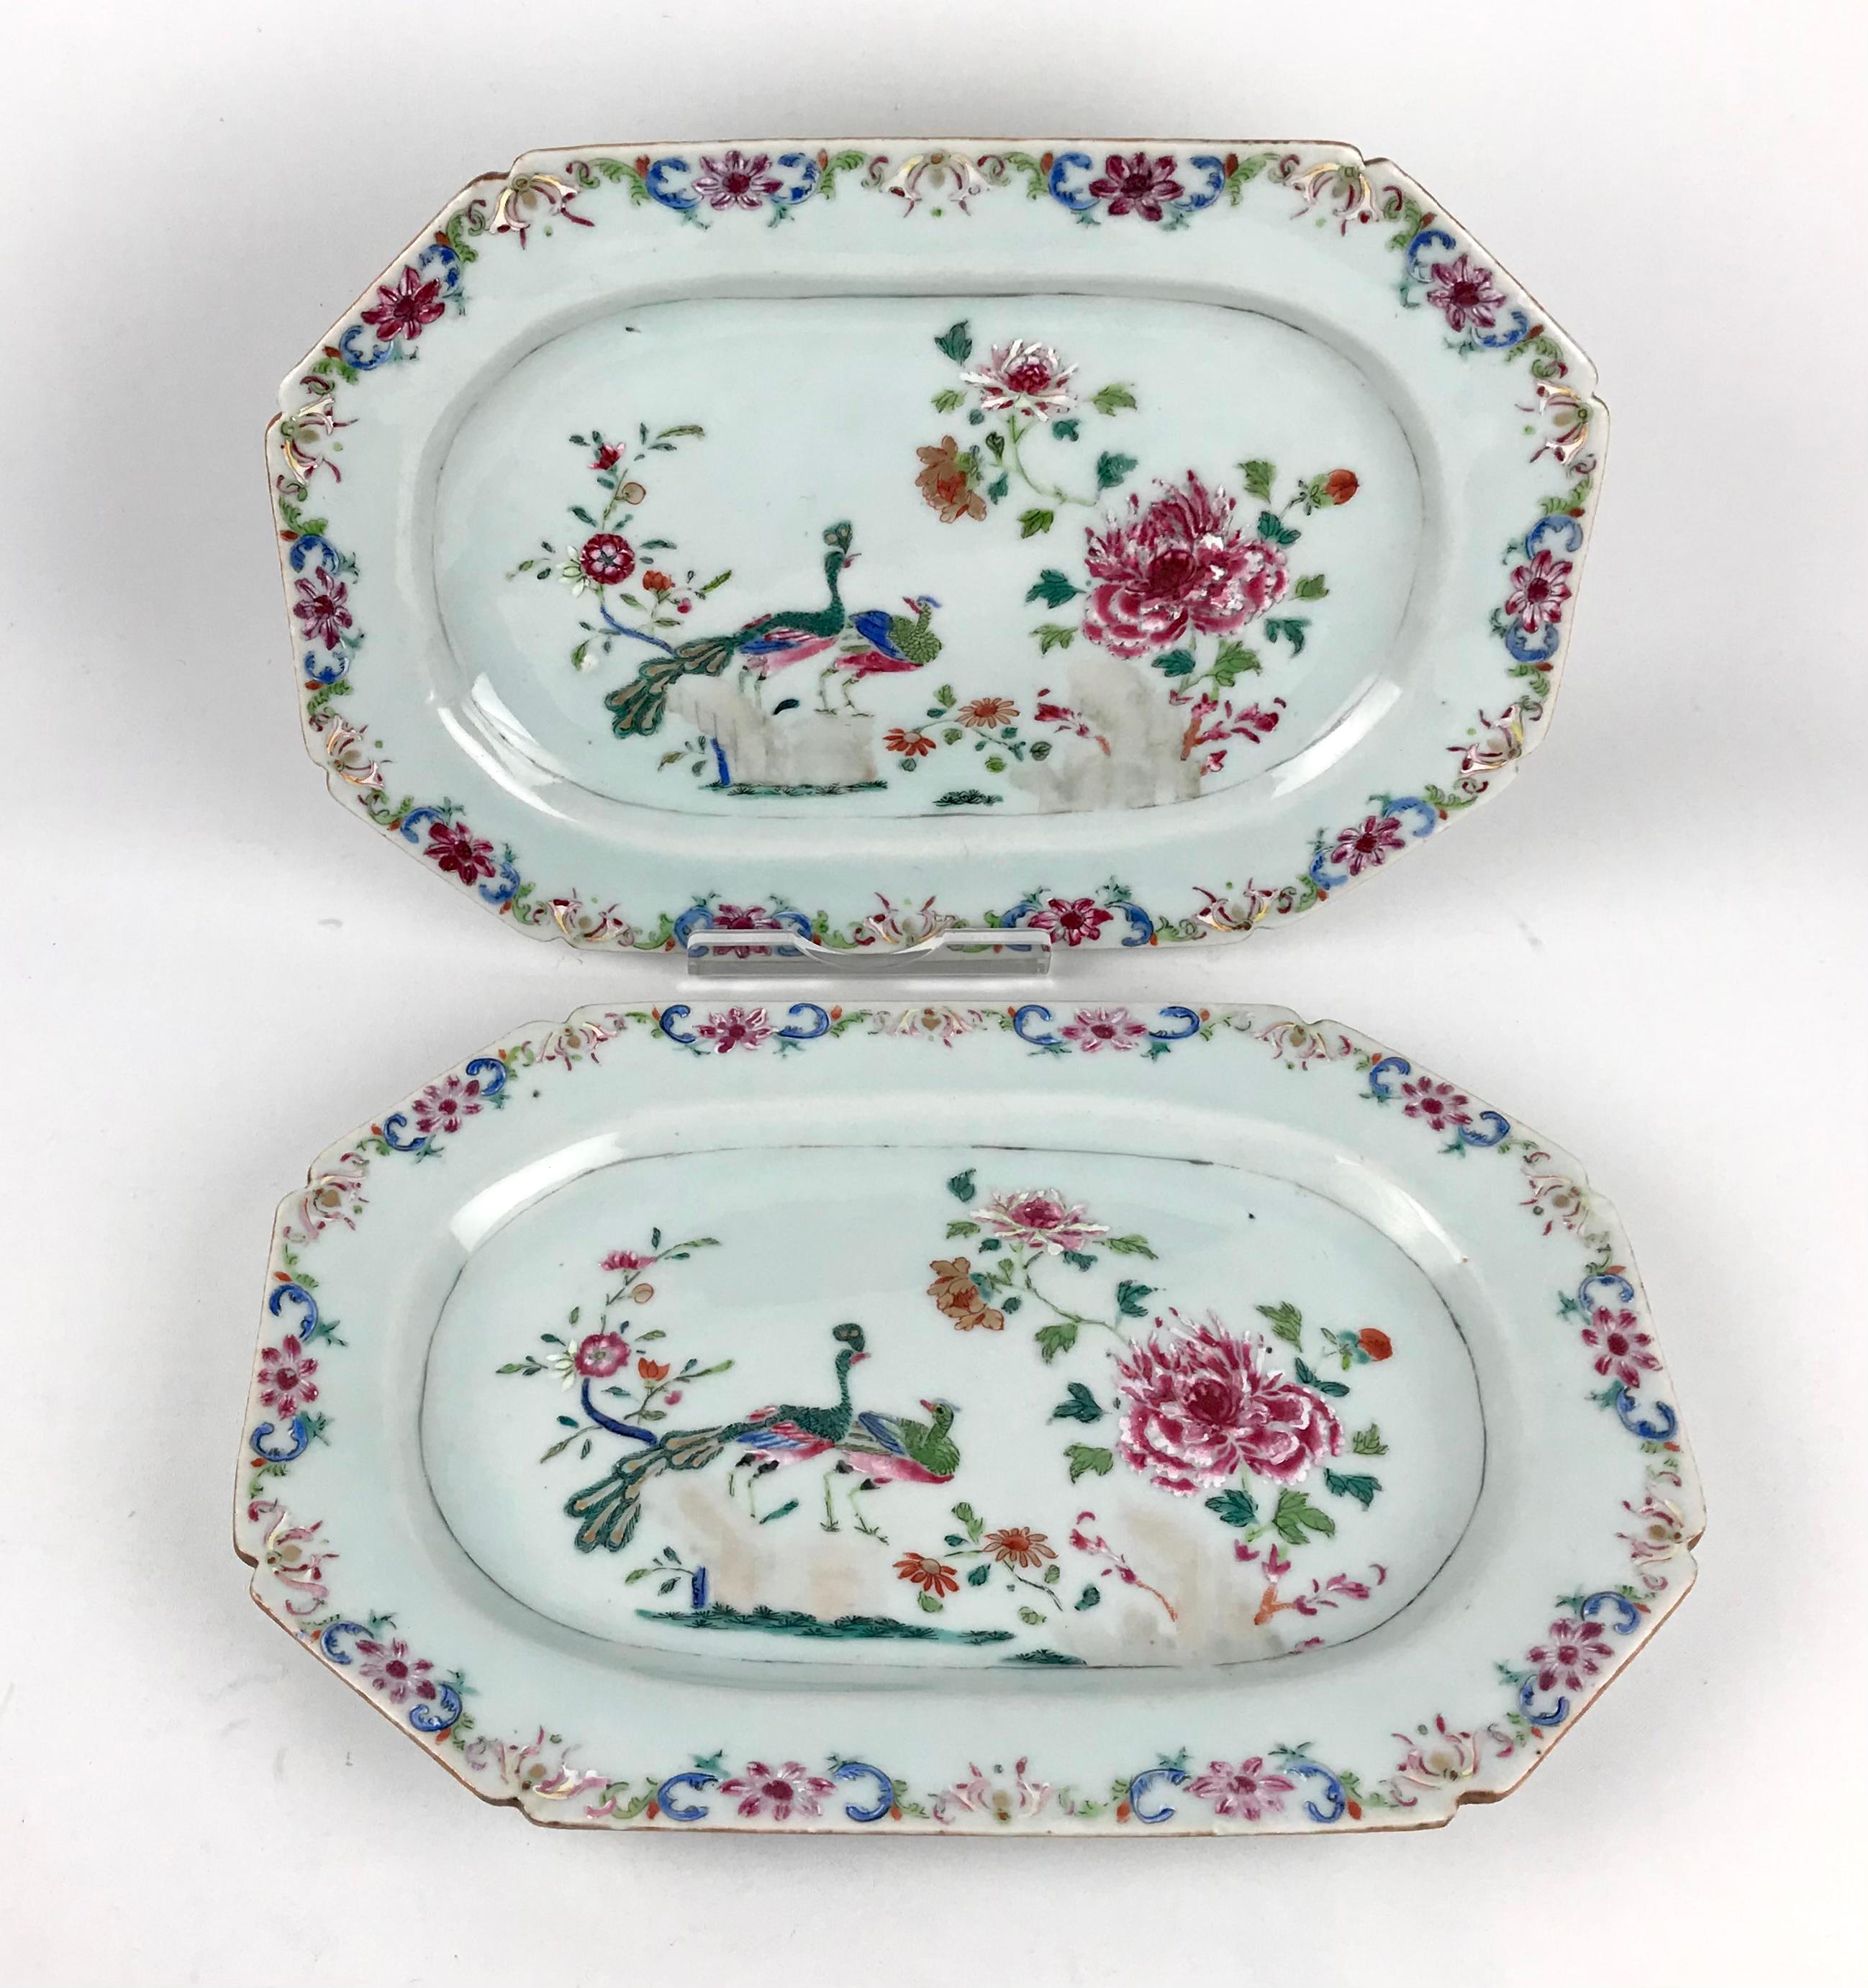 18th Century and Earlier 2 Superb Chinese 18th Porcelain Double Peacock Platter Famille Rose Qianlong